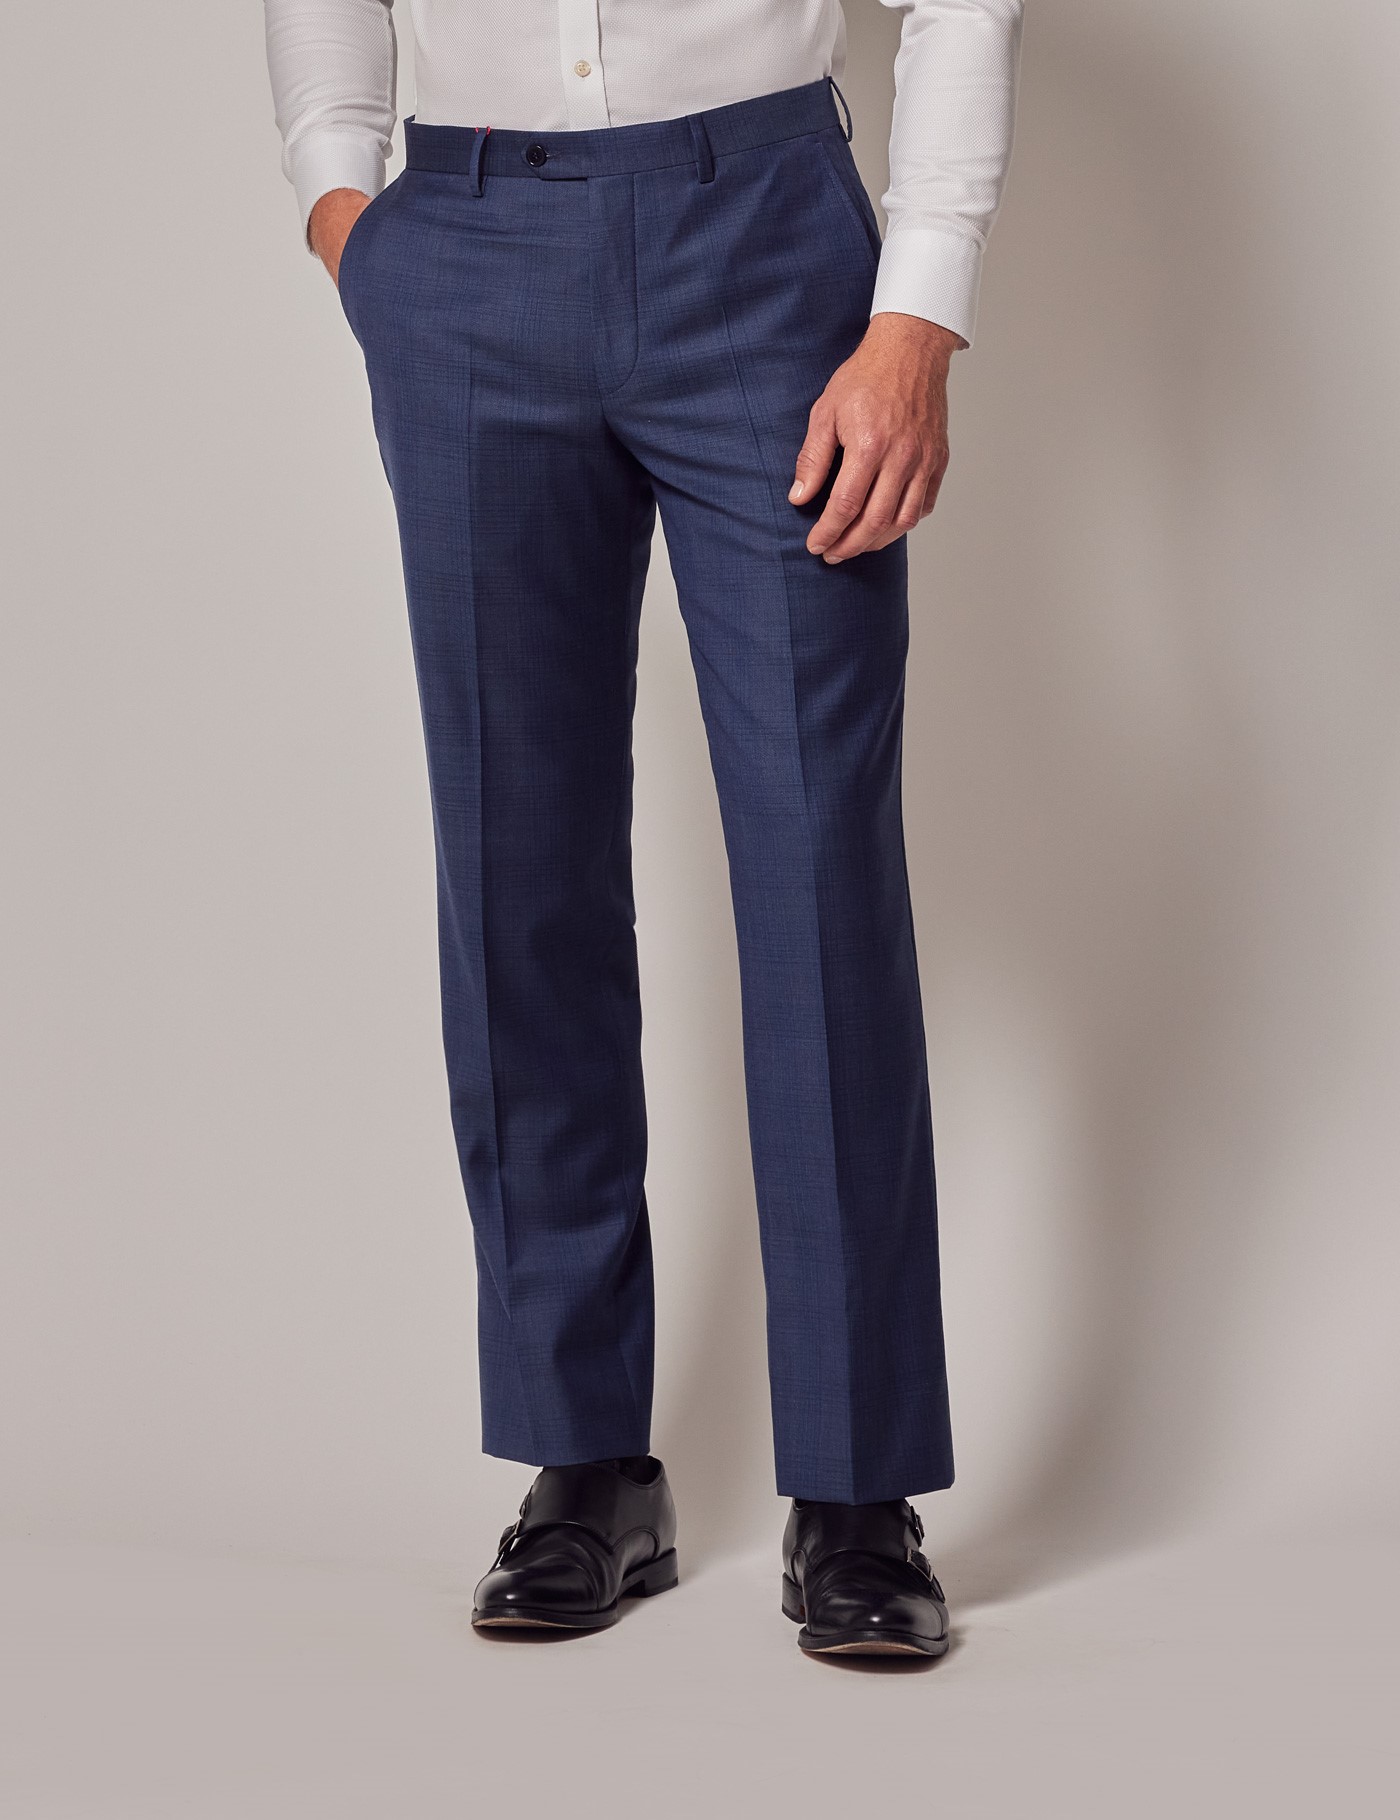 Men's Indigo Tonal Check Tailored Suit Trousers - 1913 Collection